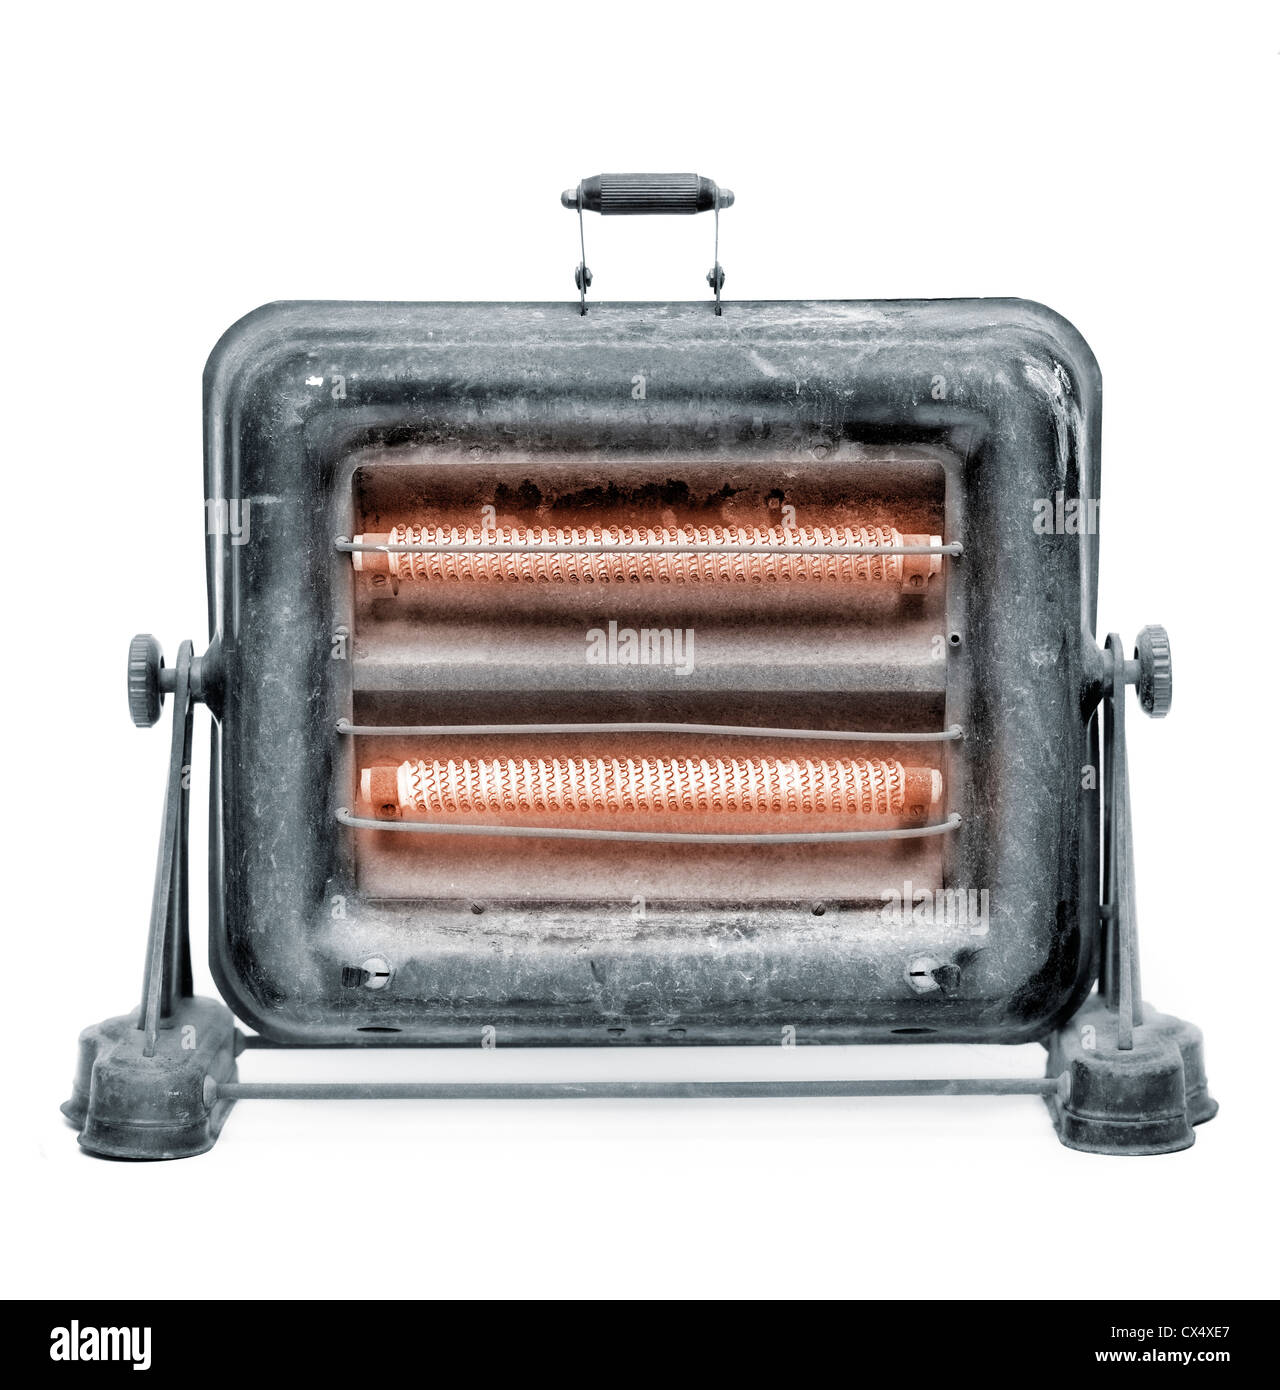 Antique electric heater on white background Stock Photo